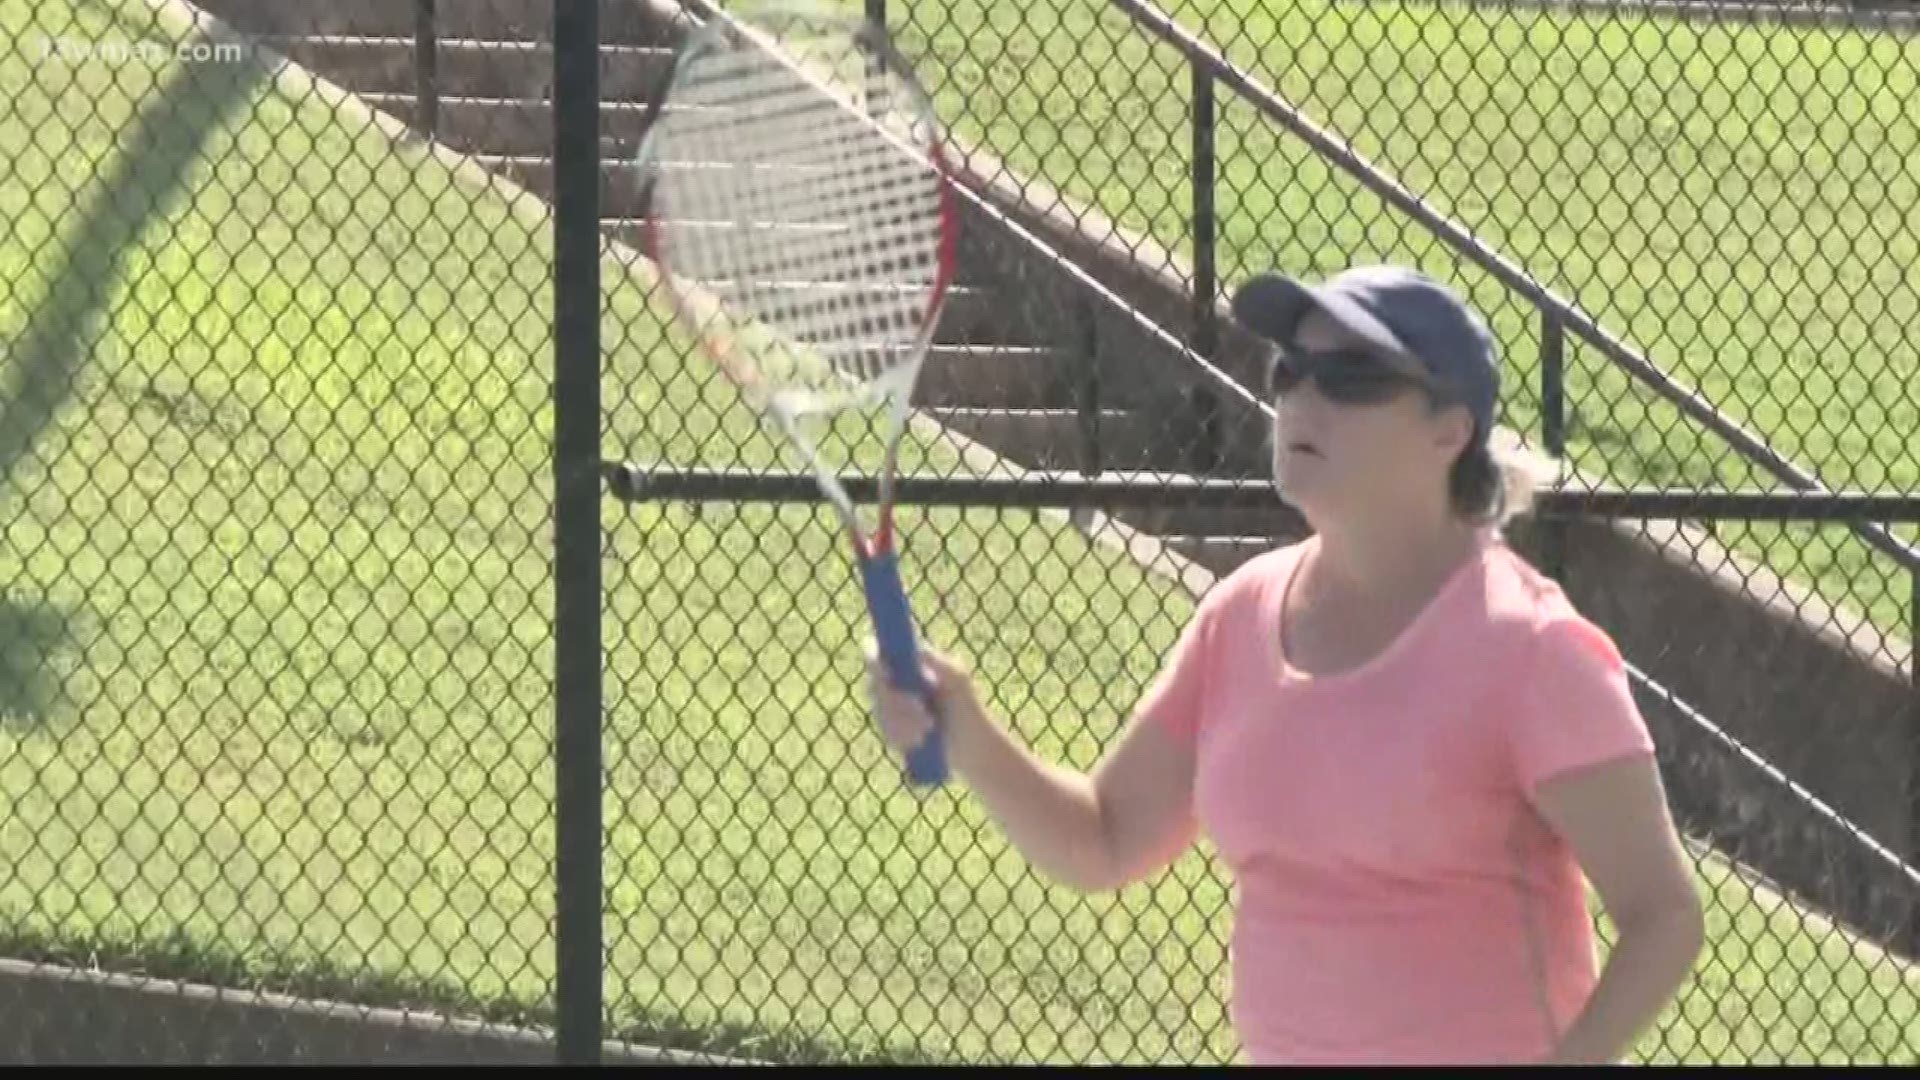 Bibb County wants to bring more tennis players to town, and the money players spend while they're here.